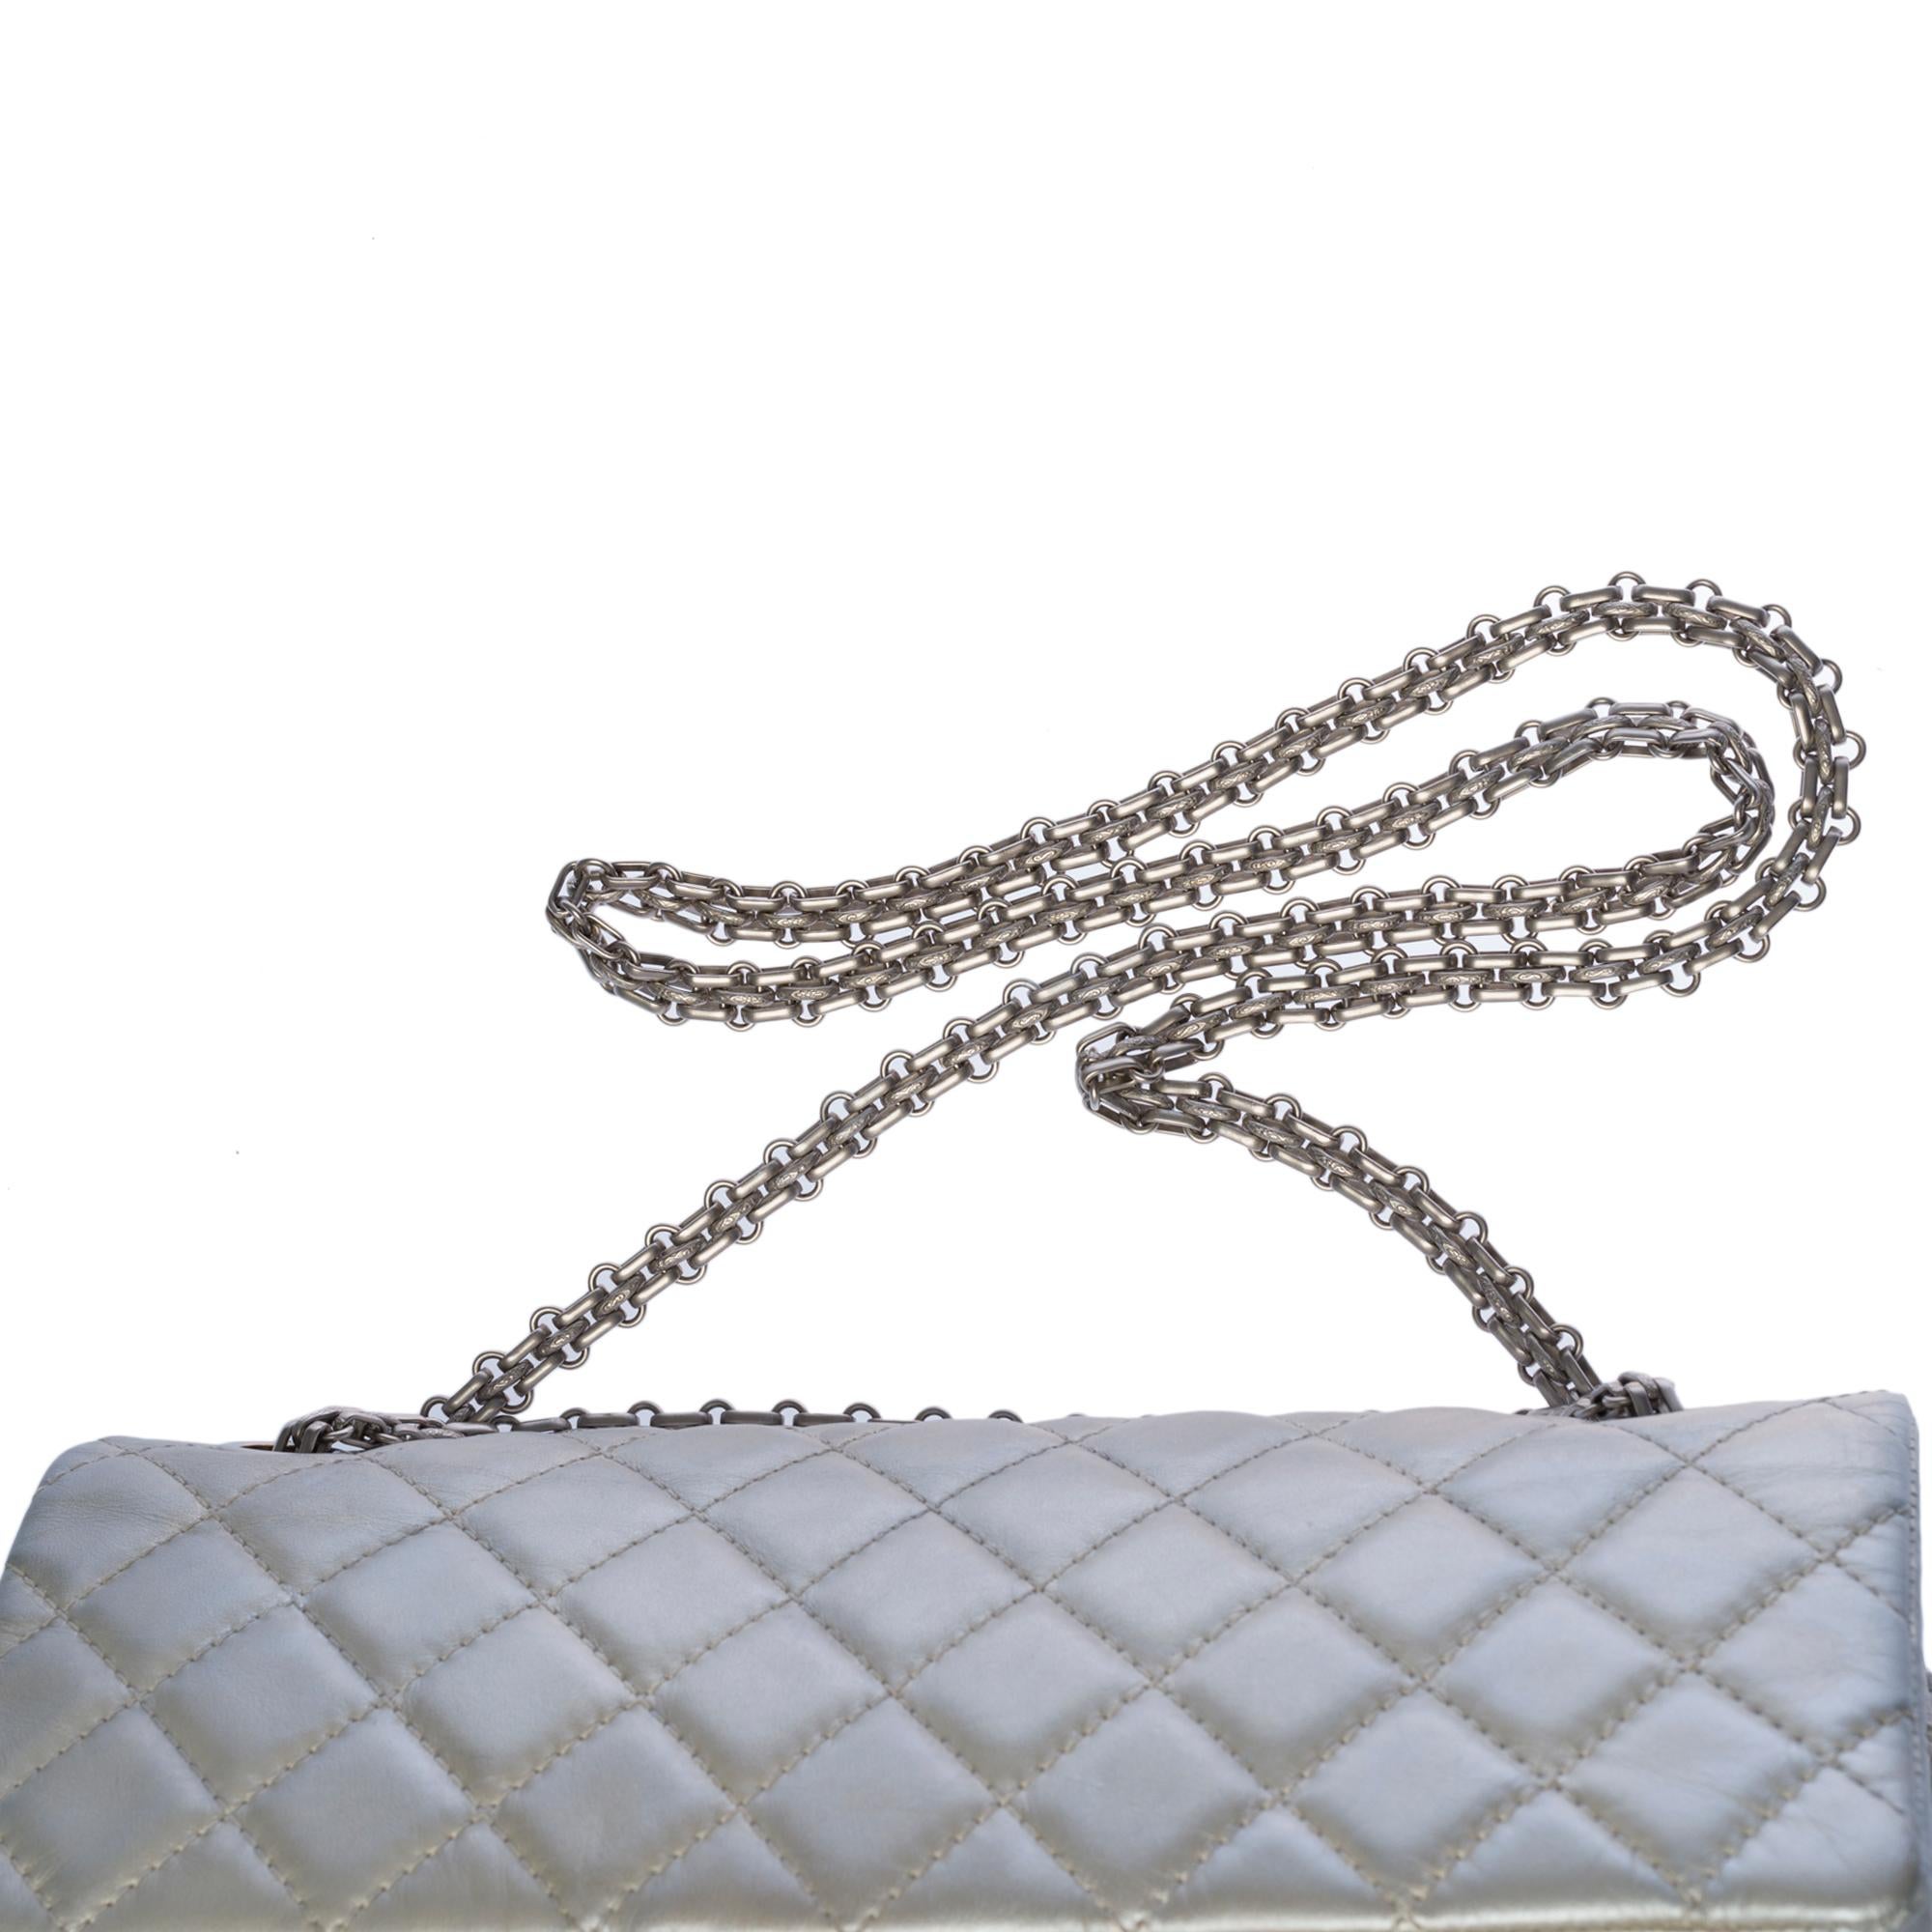 Gorgeous Chanel 2.55 double flap shoulder bag in silver quilted leather, SHW For Sale 4